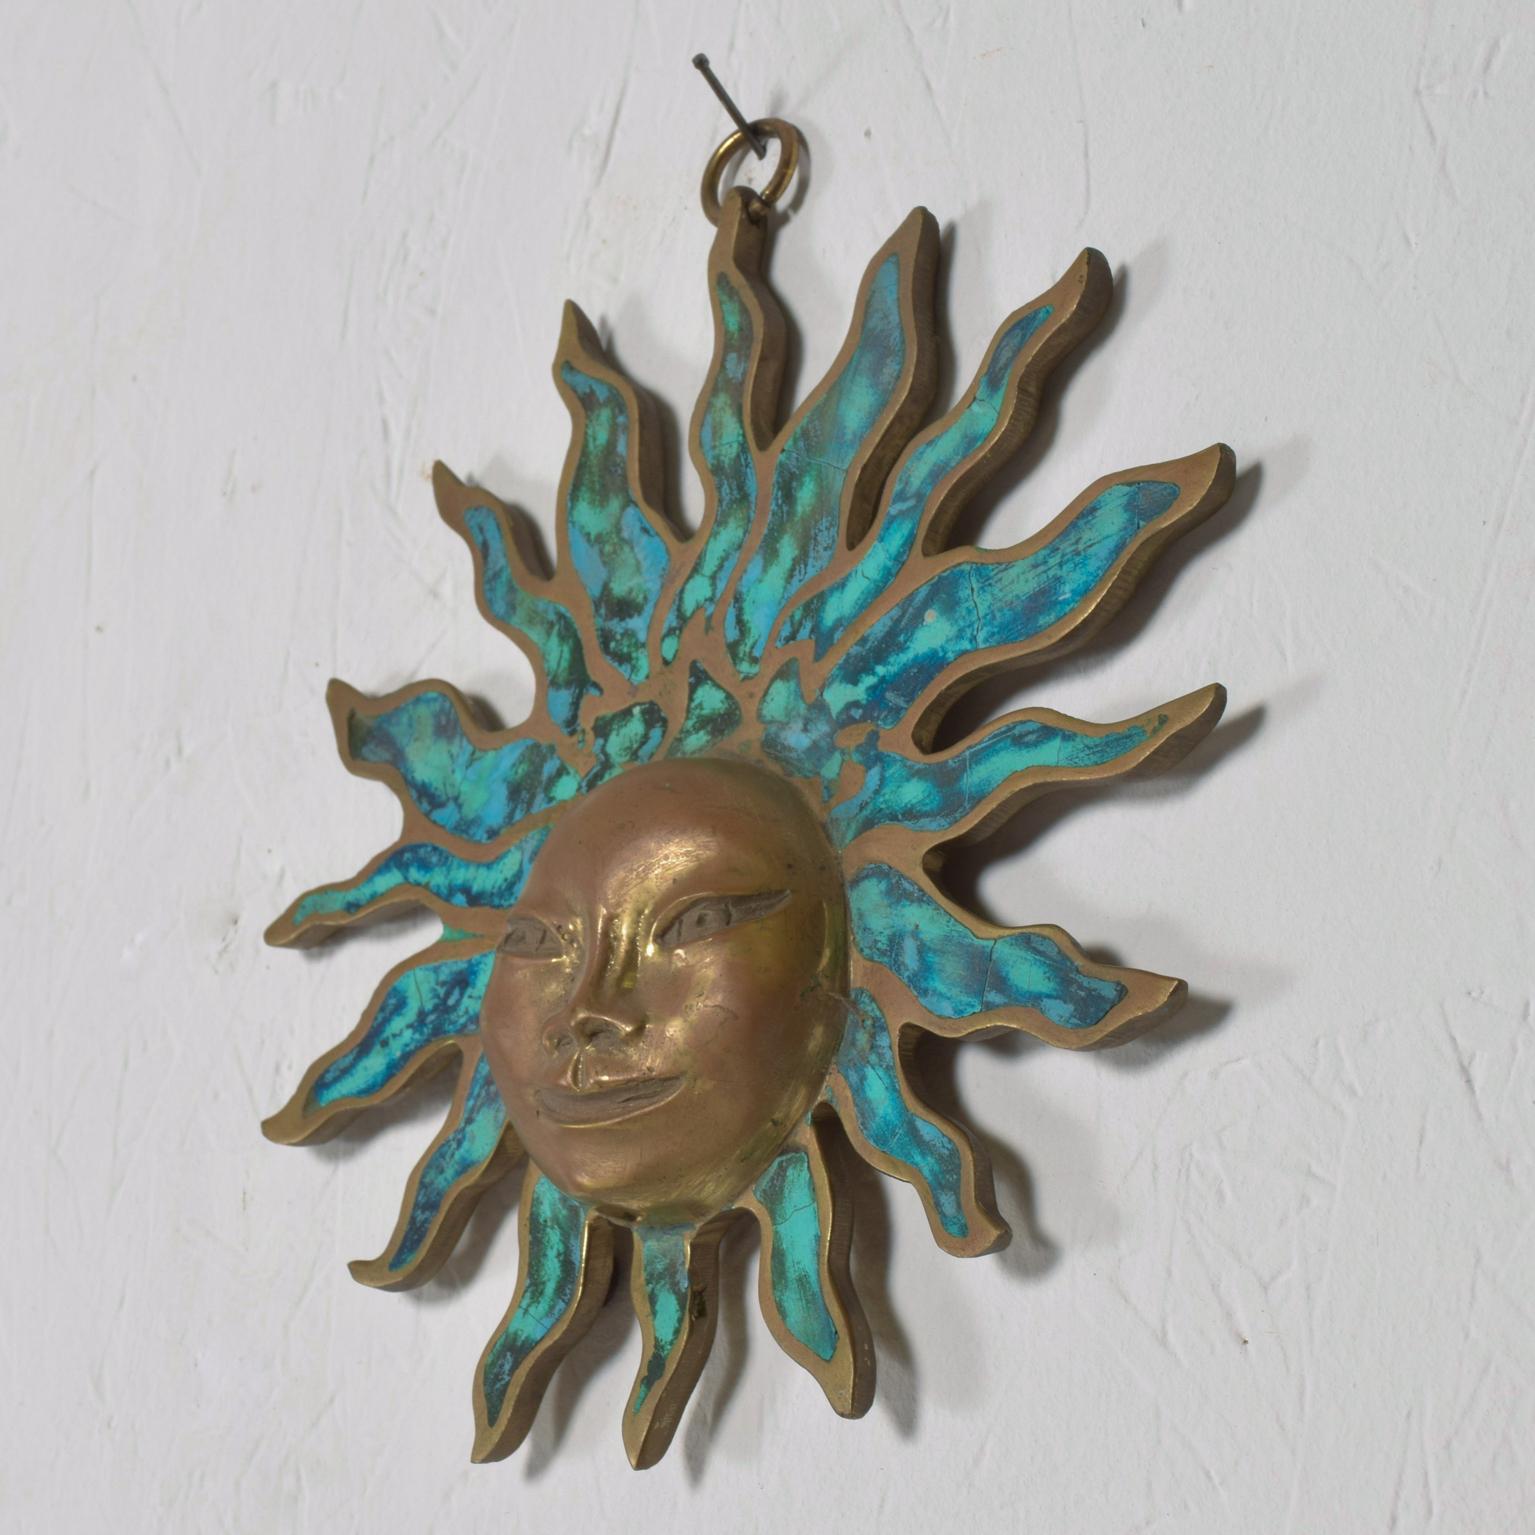 For you: Pepe Mendoza powerful sun god sculpture wall plaque, Mexico, 1958

Designer: Pepe Mendoza Manufacturer: Pepe Mendoza Studio
Period/style: Mid-Century Modern country: Mexico
Date: 1958

Signed by maker.
Dimensions: 8 7/8